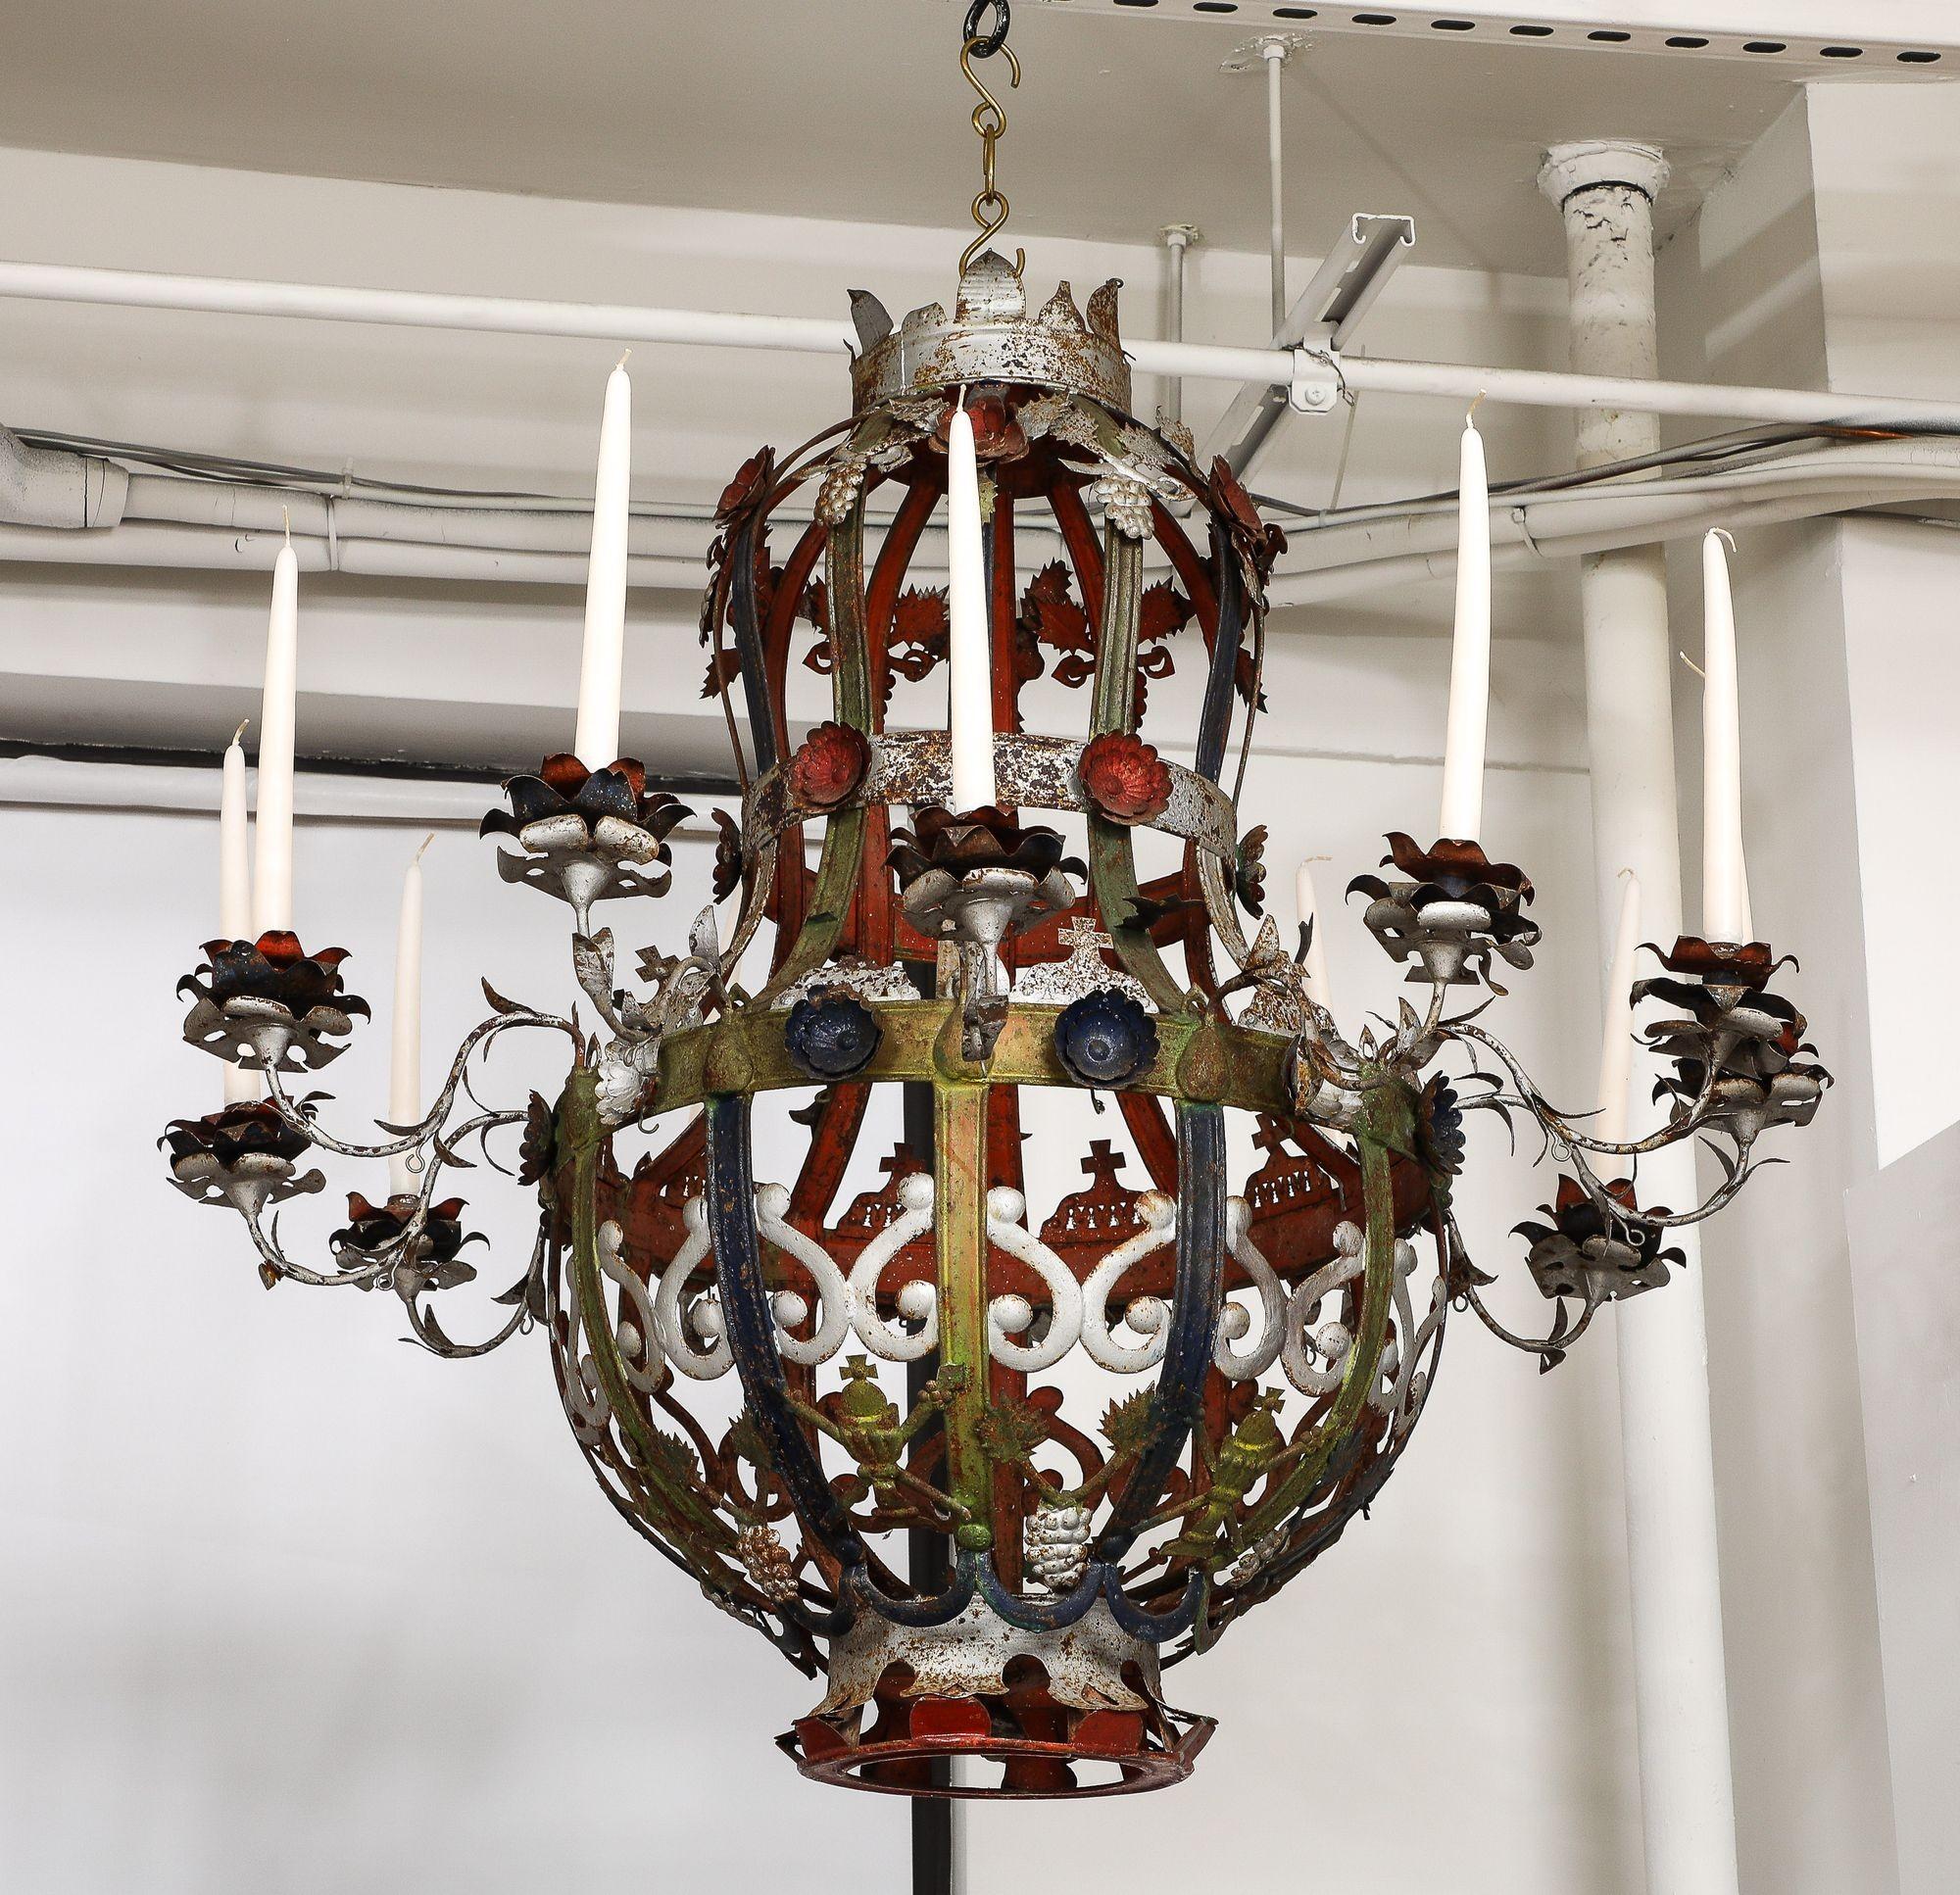 Whimsical Italian 19th Century polychrome tole 12 light chandelier, with bacchanalian theme, featuring clusters of grapes in embossed tin, the whole retaining original paint and all original foliate adorned candle arms.